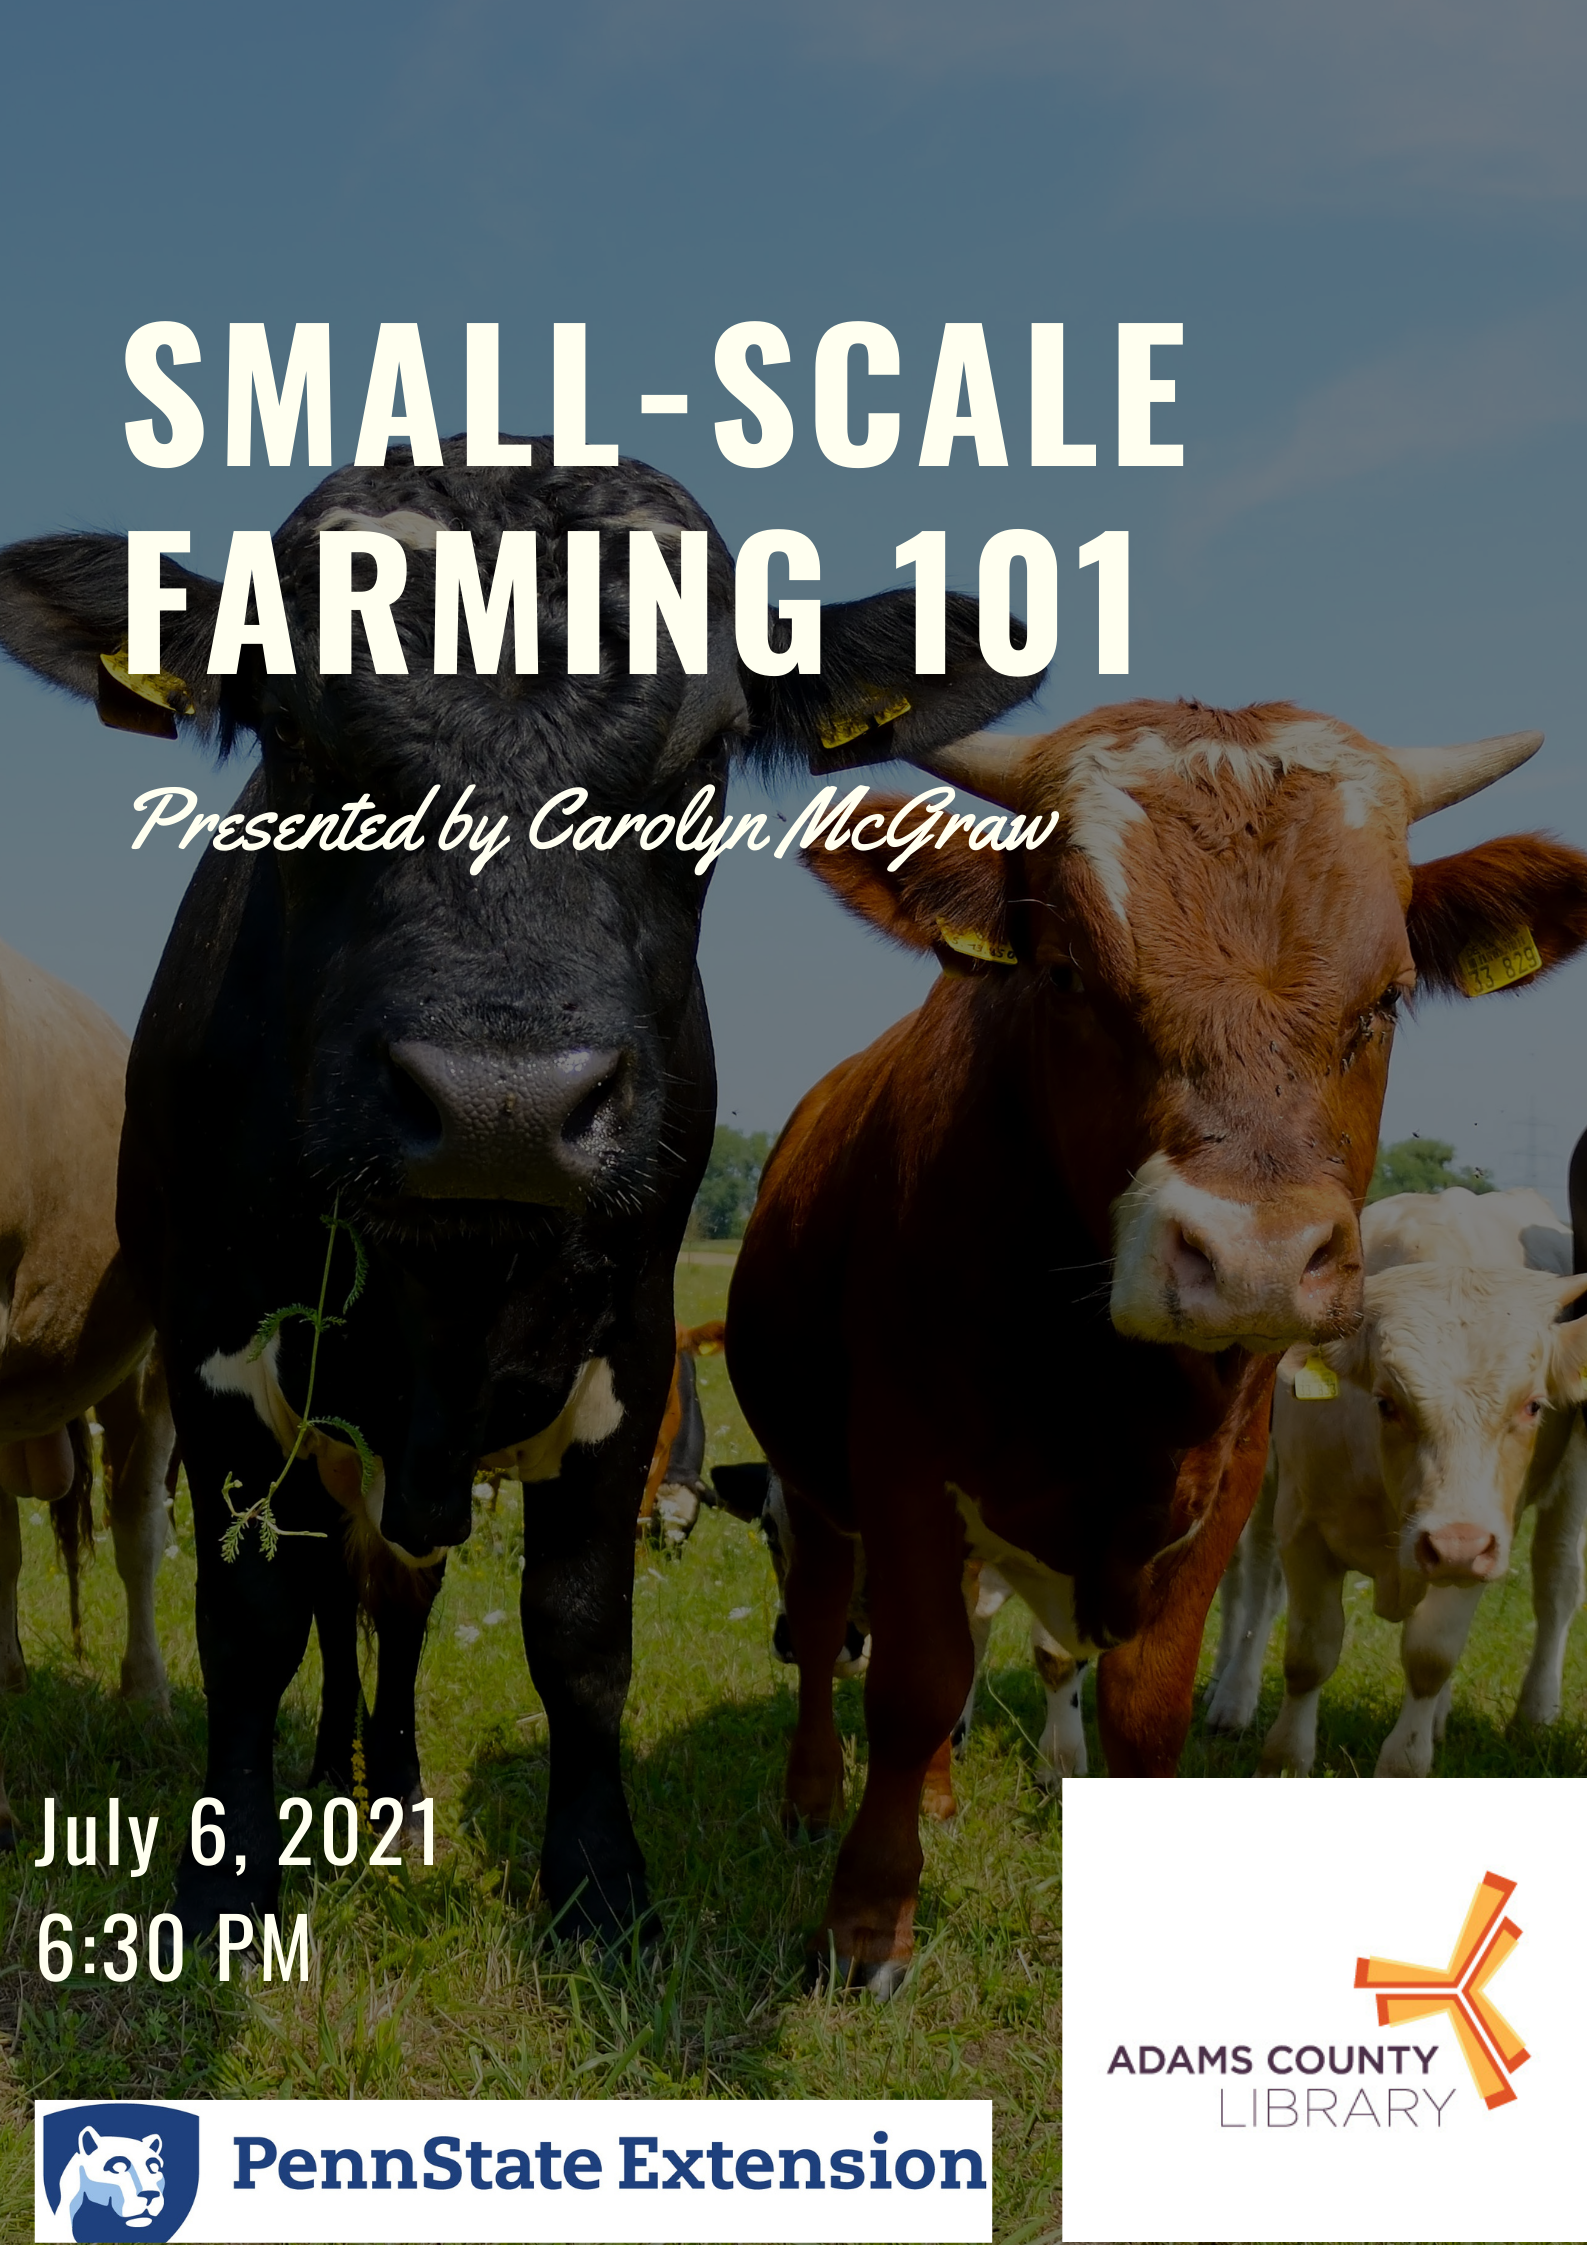 An image of cows with the ACLS and Penn State Extension logo. The text reads "SMALL-SCALE FARMING 101, Presented by Carolyn McGraw, July 6, 2021, 6:30 PM"